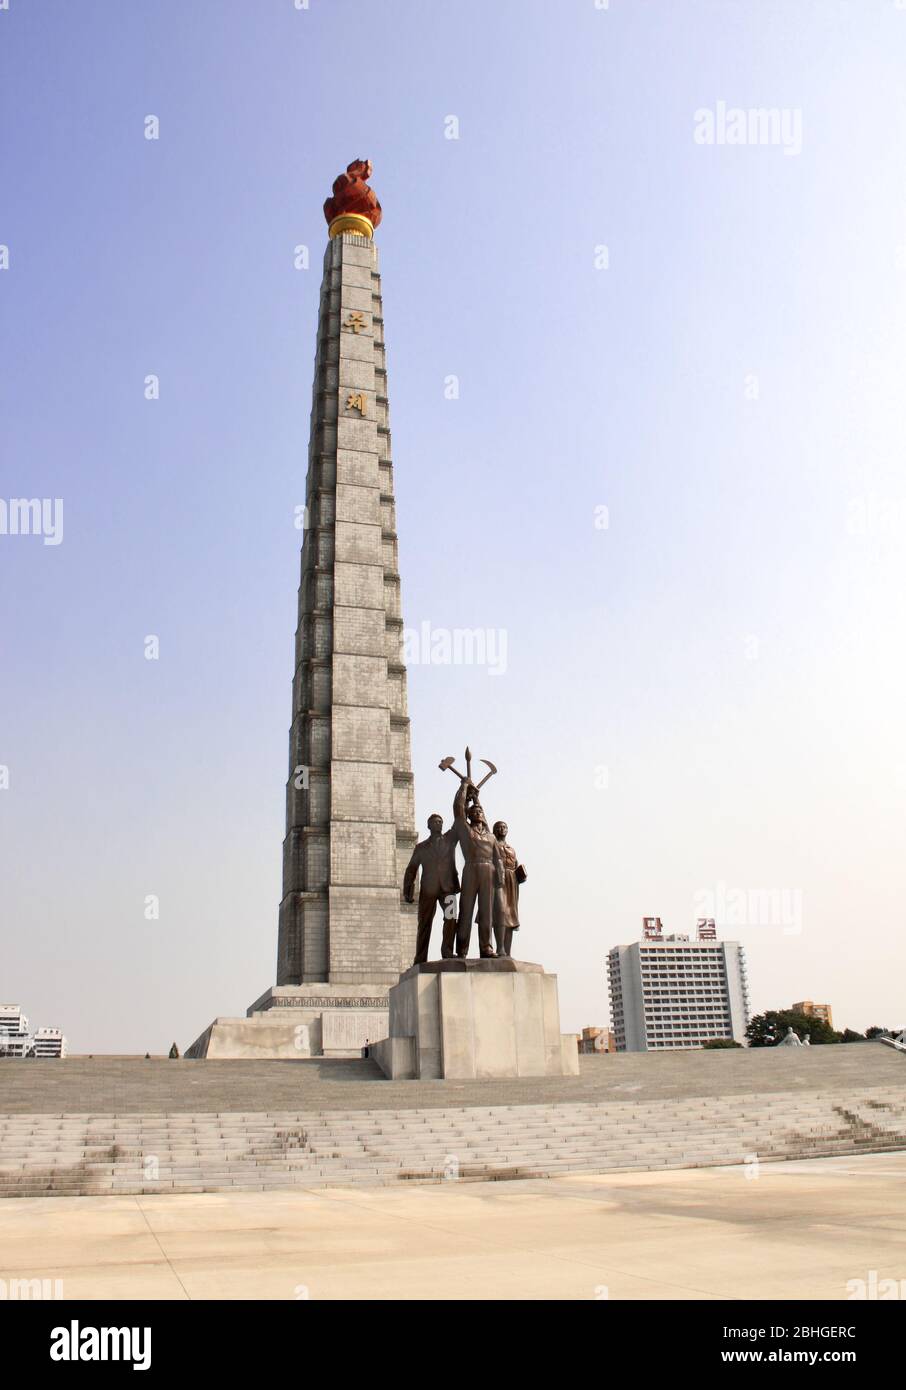 PYONGYANG, NORTH KOREA (DPRK) - SEPTEMBER 24, 2017: Tower of the Juche Idea and statues of people (worker, farmer and scientist) with korean national Stock Photo